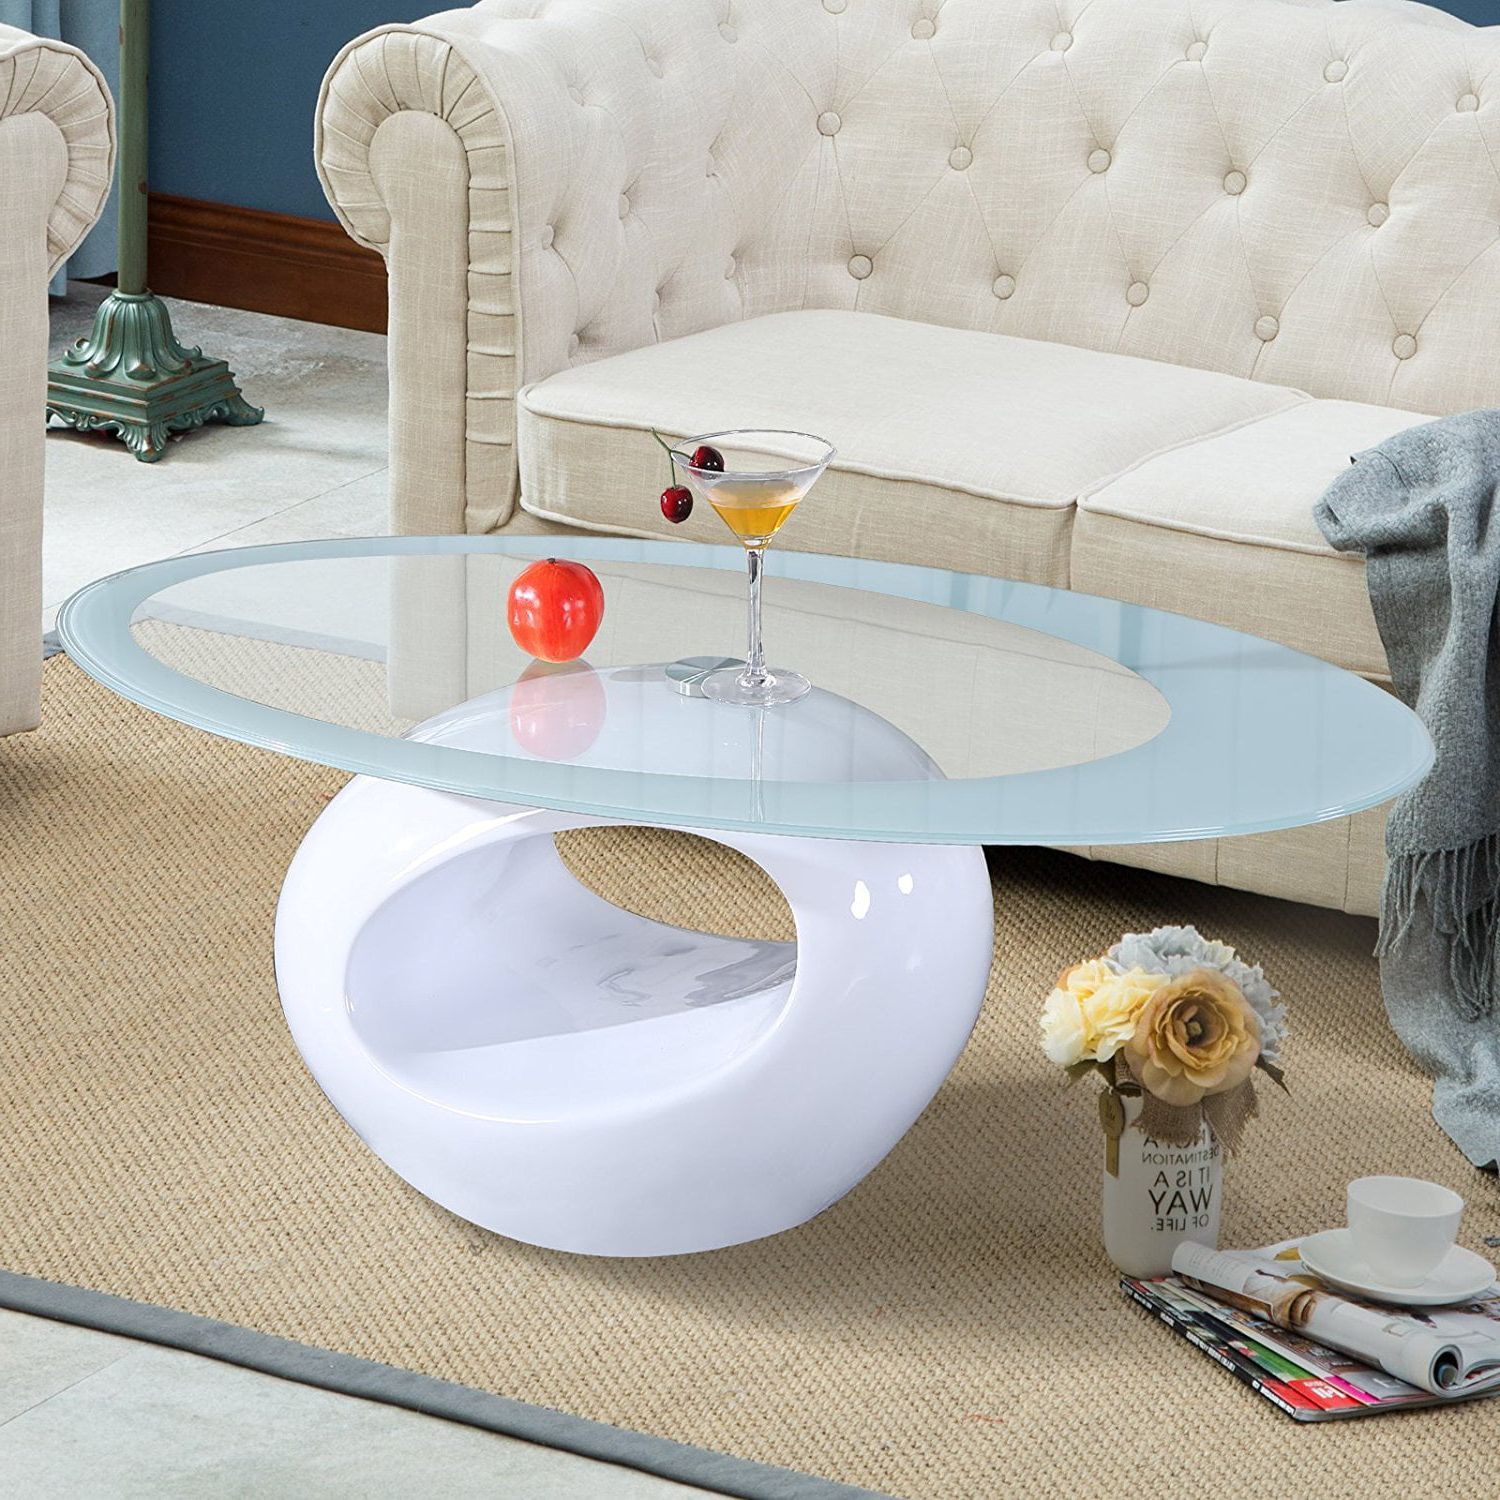 Uenjoy Coffee Table Living Room Furniture Contemporary Modern Design Regarding Most Recent Oval Glass Coffee Tables (View 5 of 15)